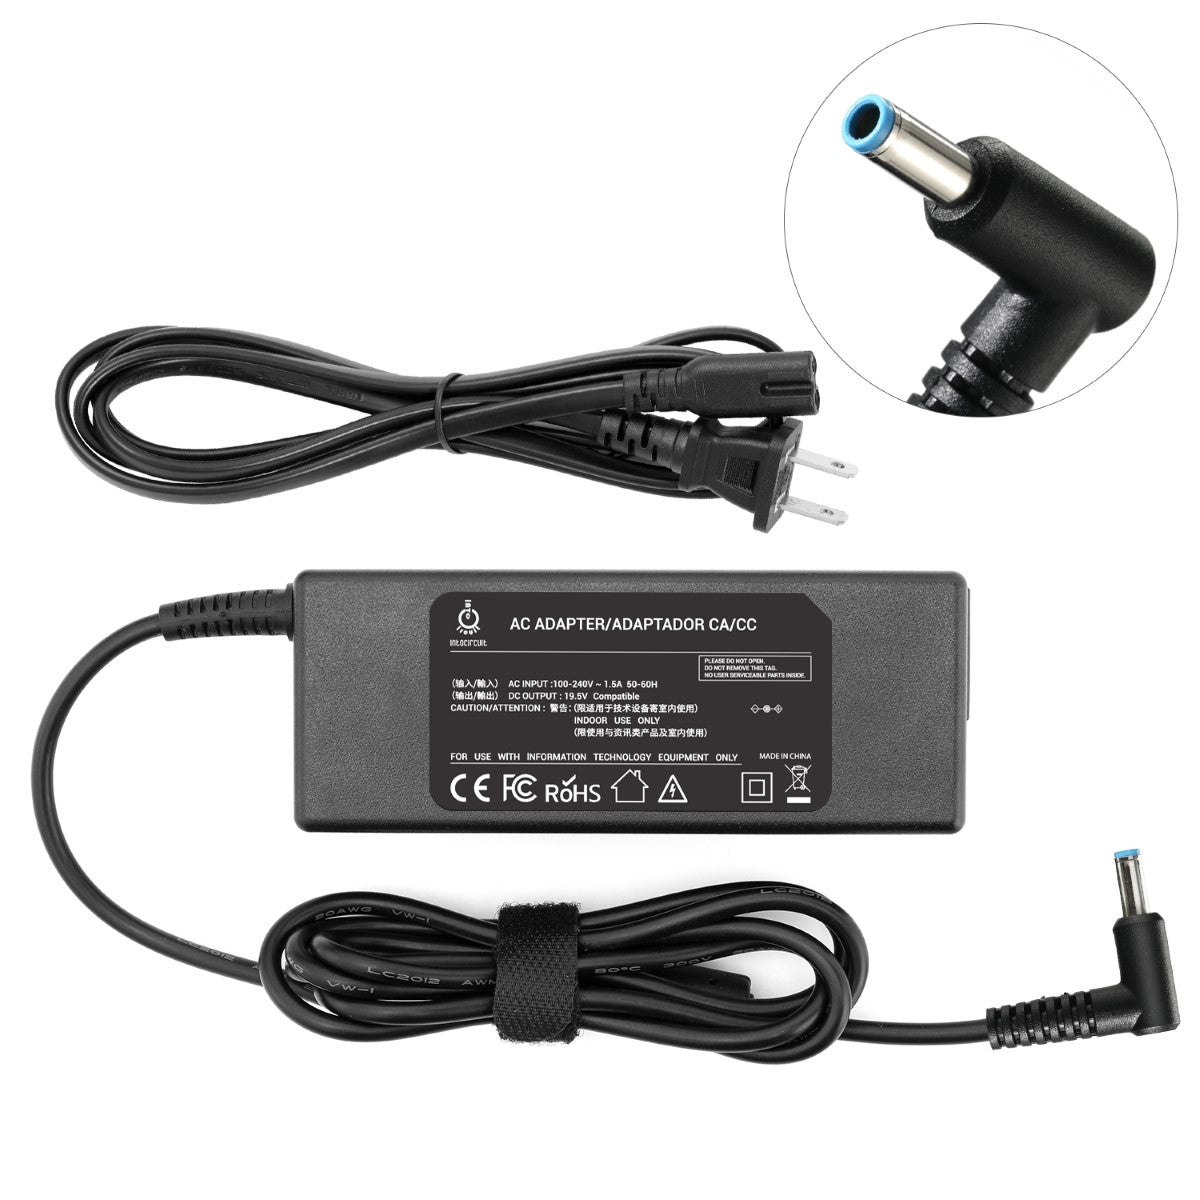 Charger for HP Envy Touchsmart 17-j115cl Notebook